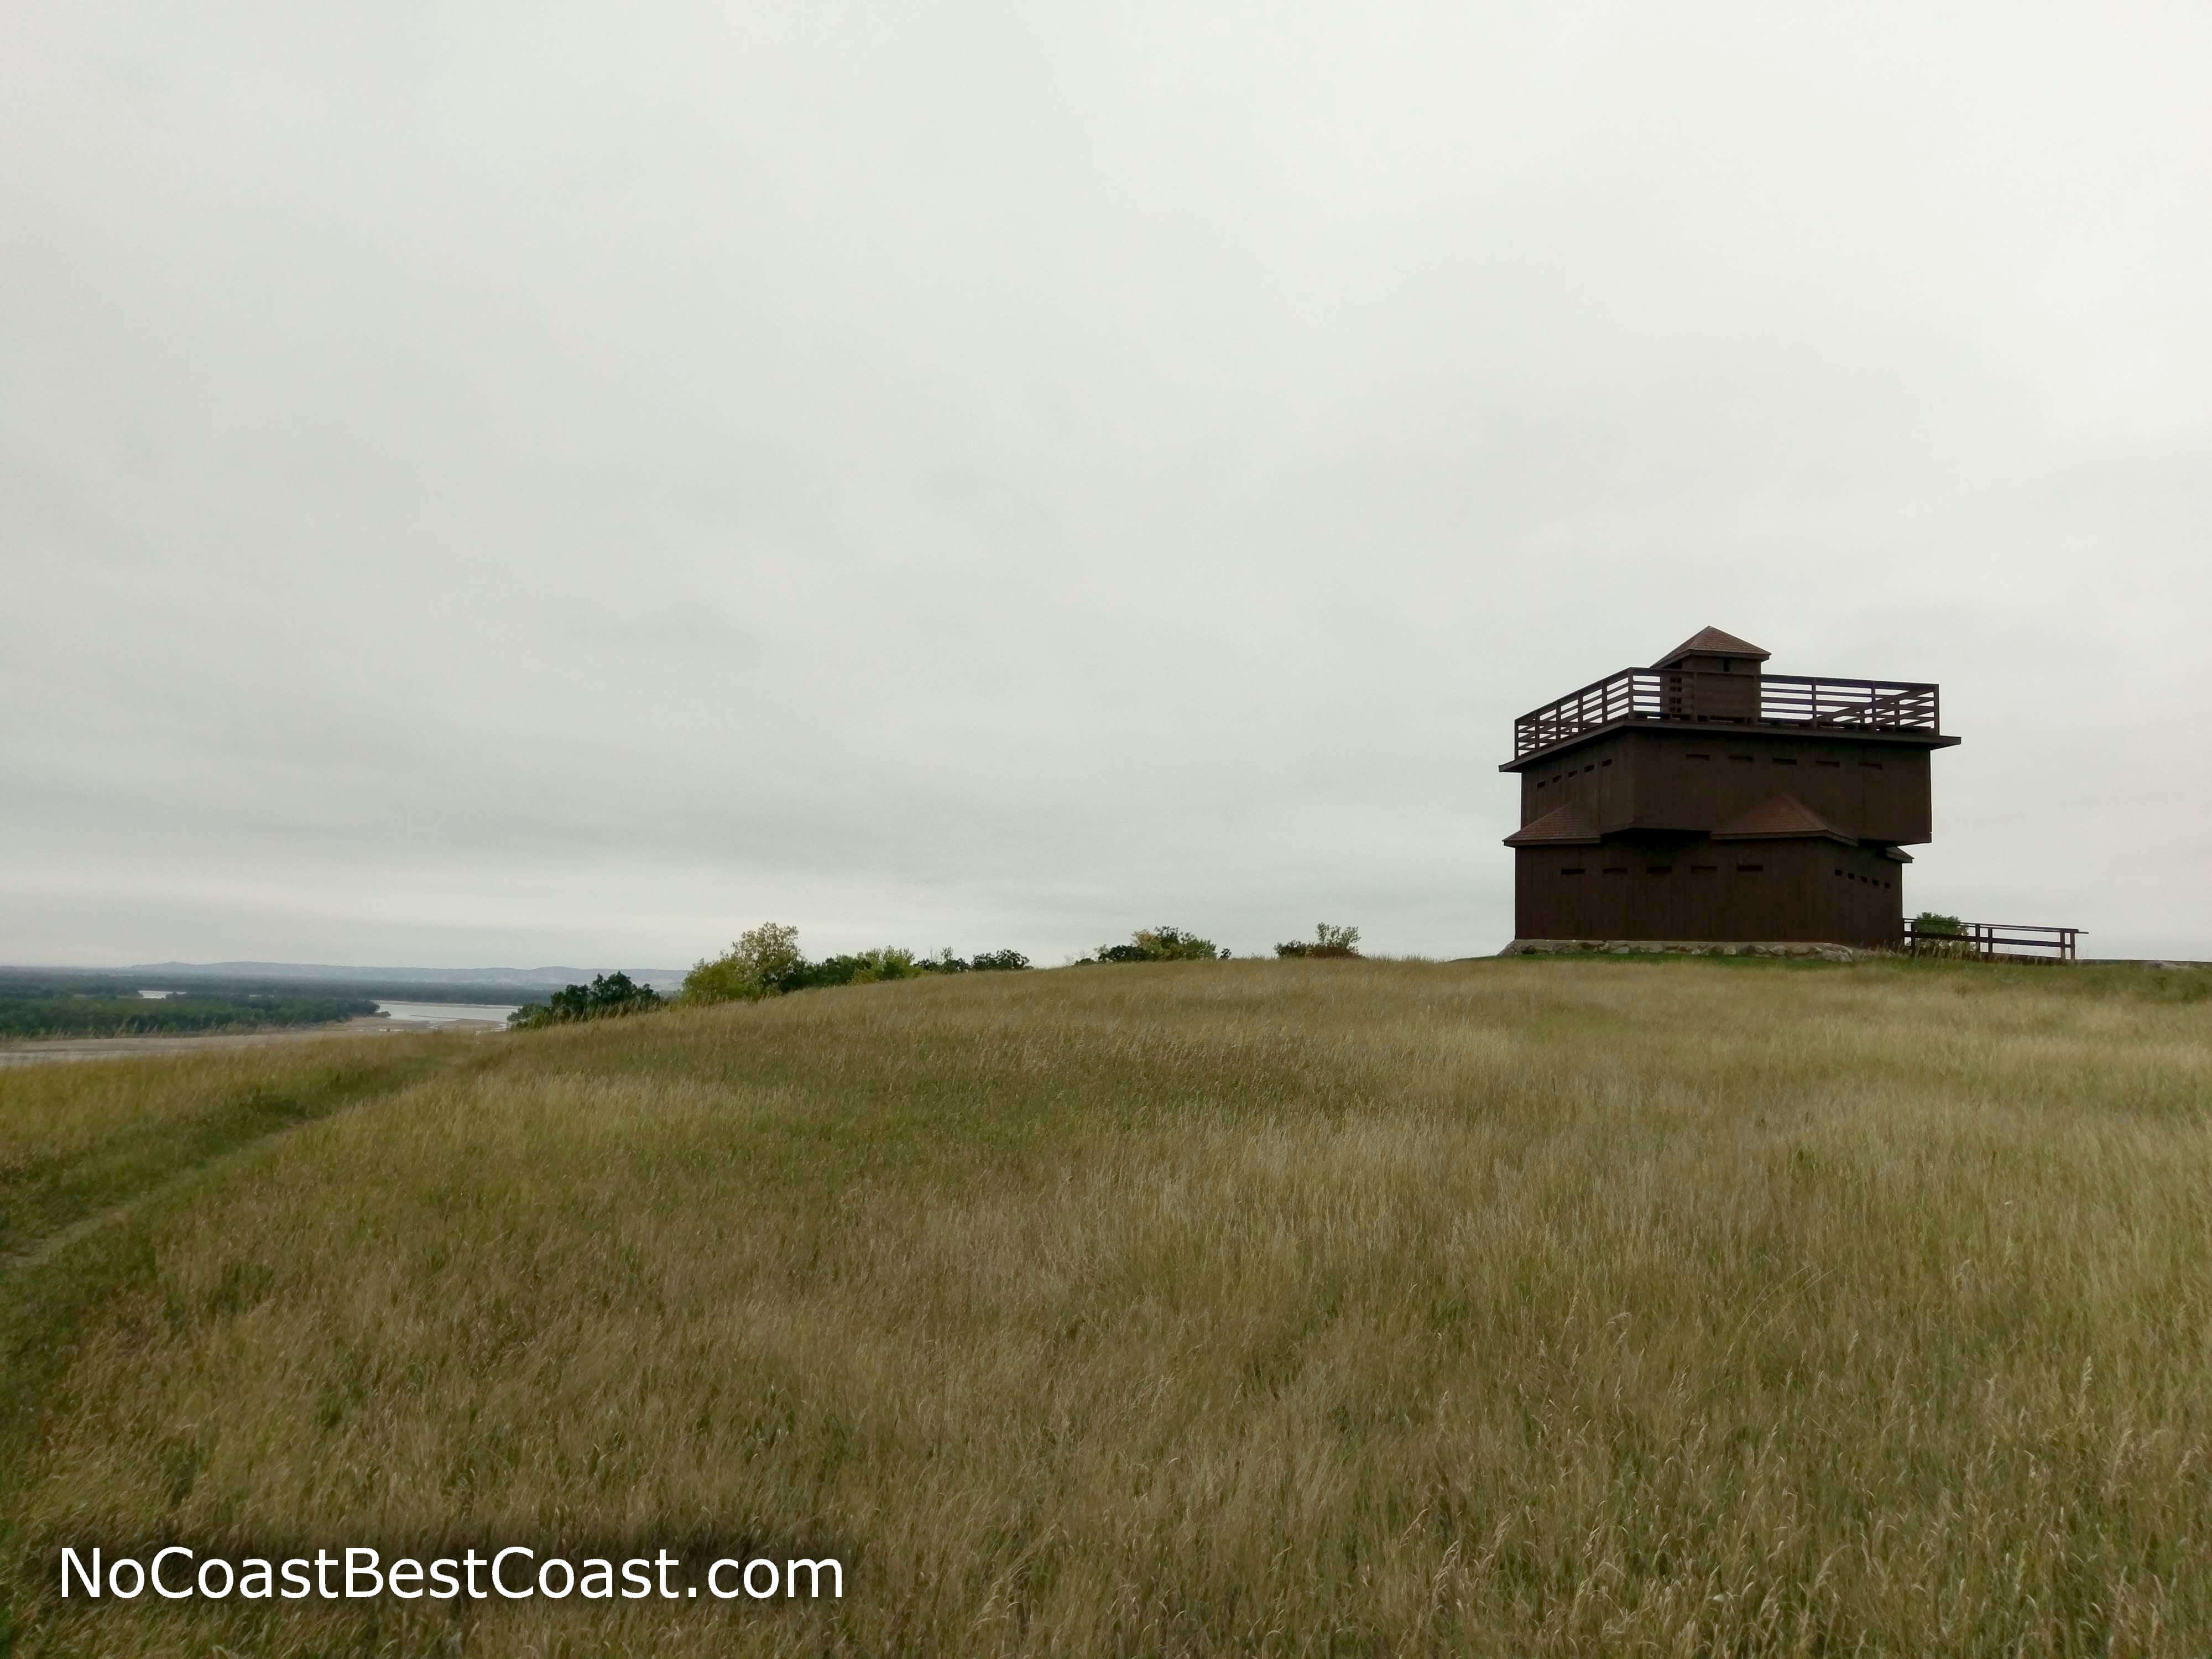 Go inside the blockhouse and climb to the top for views